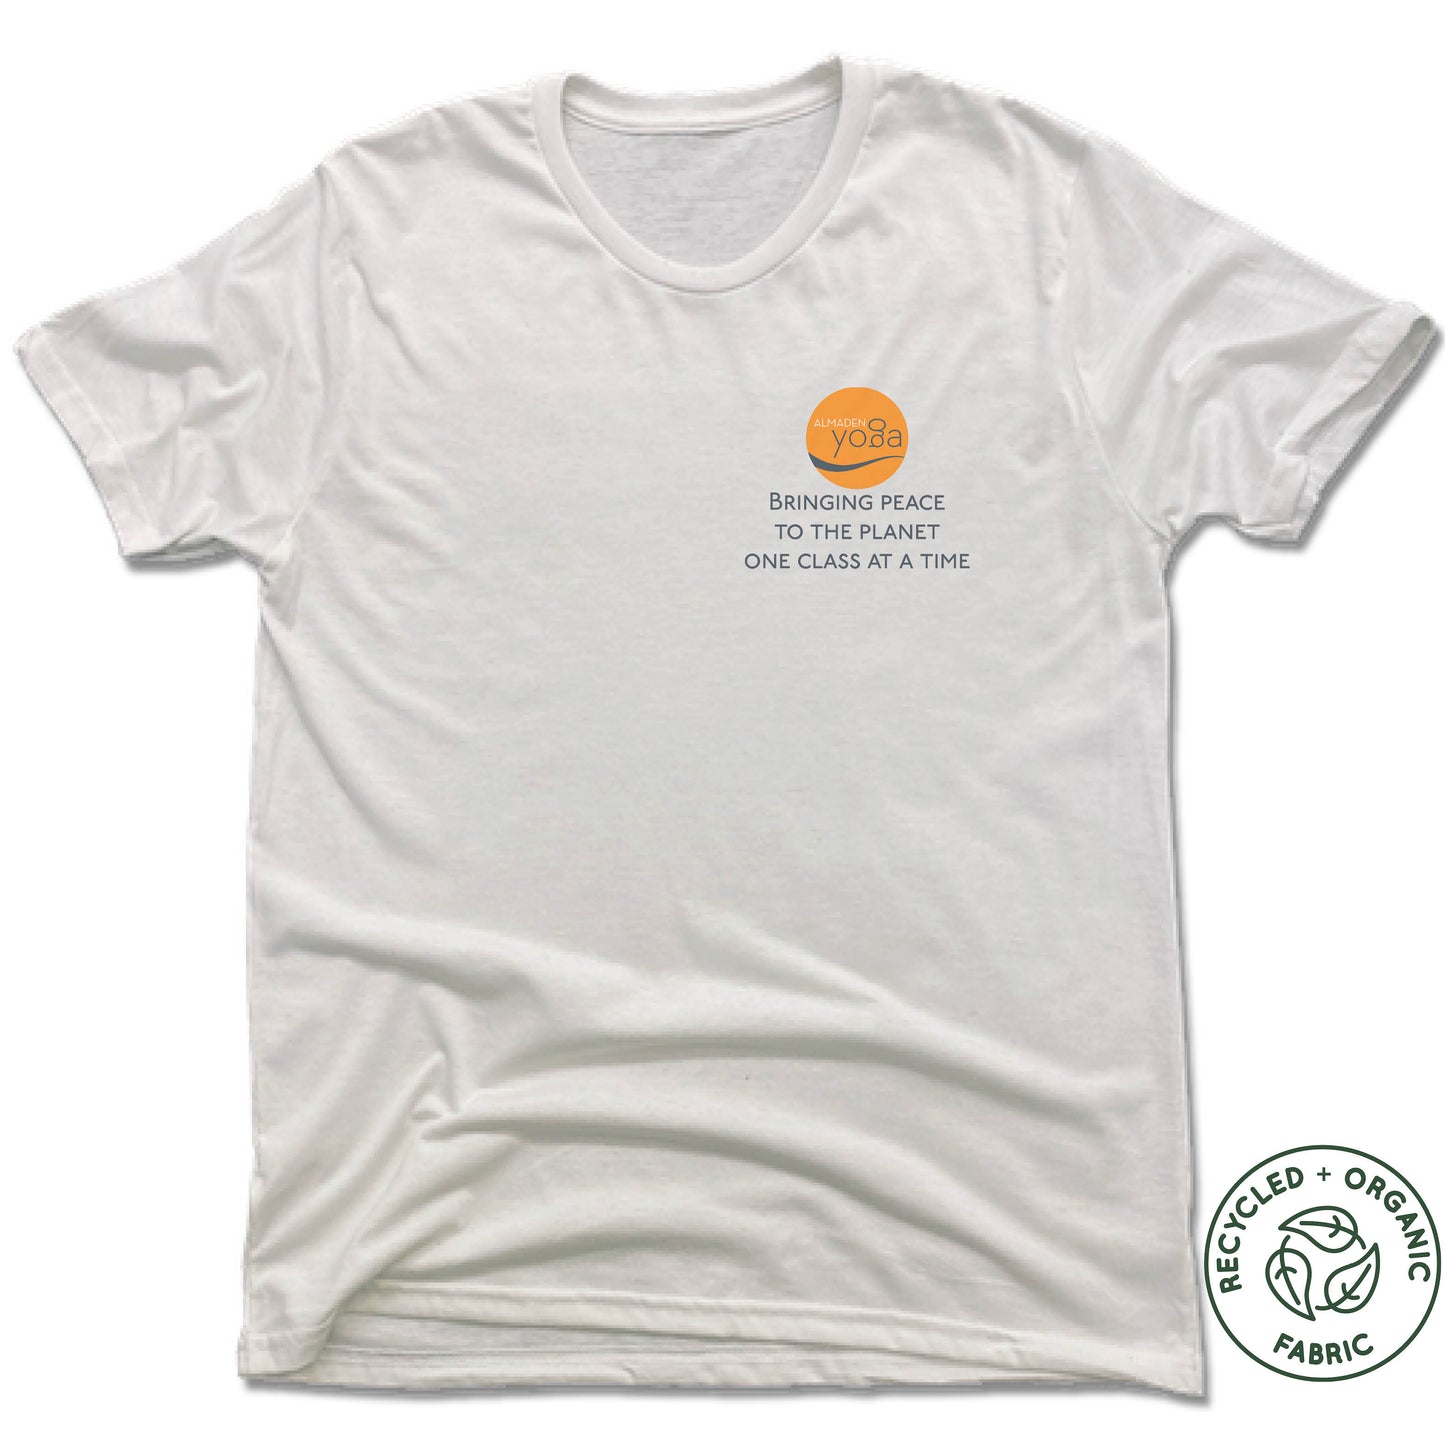 ALMADEN YOGA | UNISEX WHITE Recycled Tri-Blend | BRINGING PEACE TOTHE PLANET ONE CLASS AT A TIME